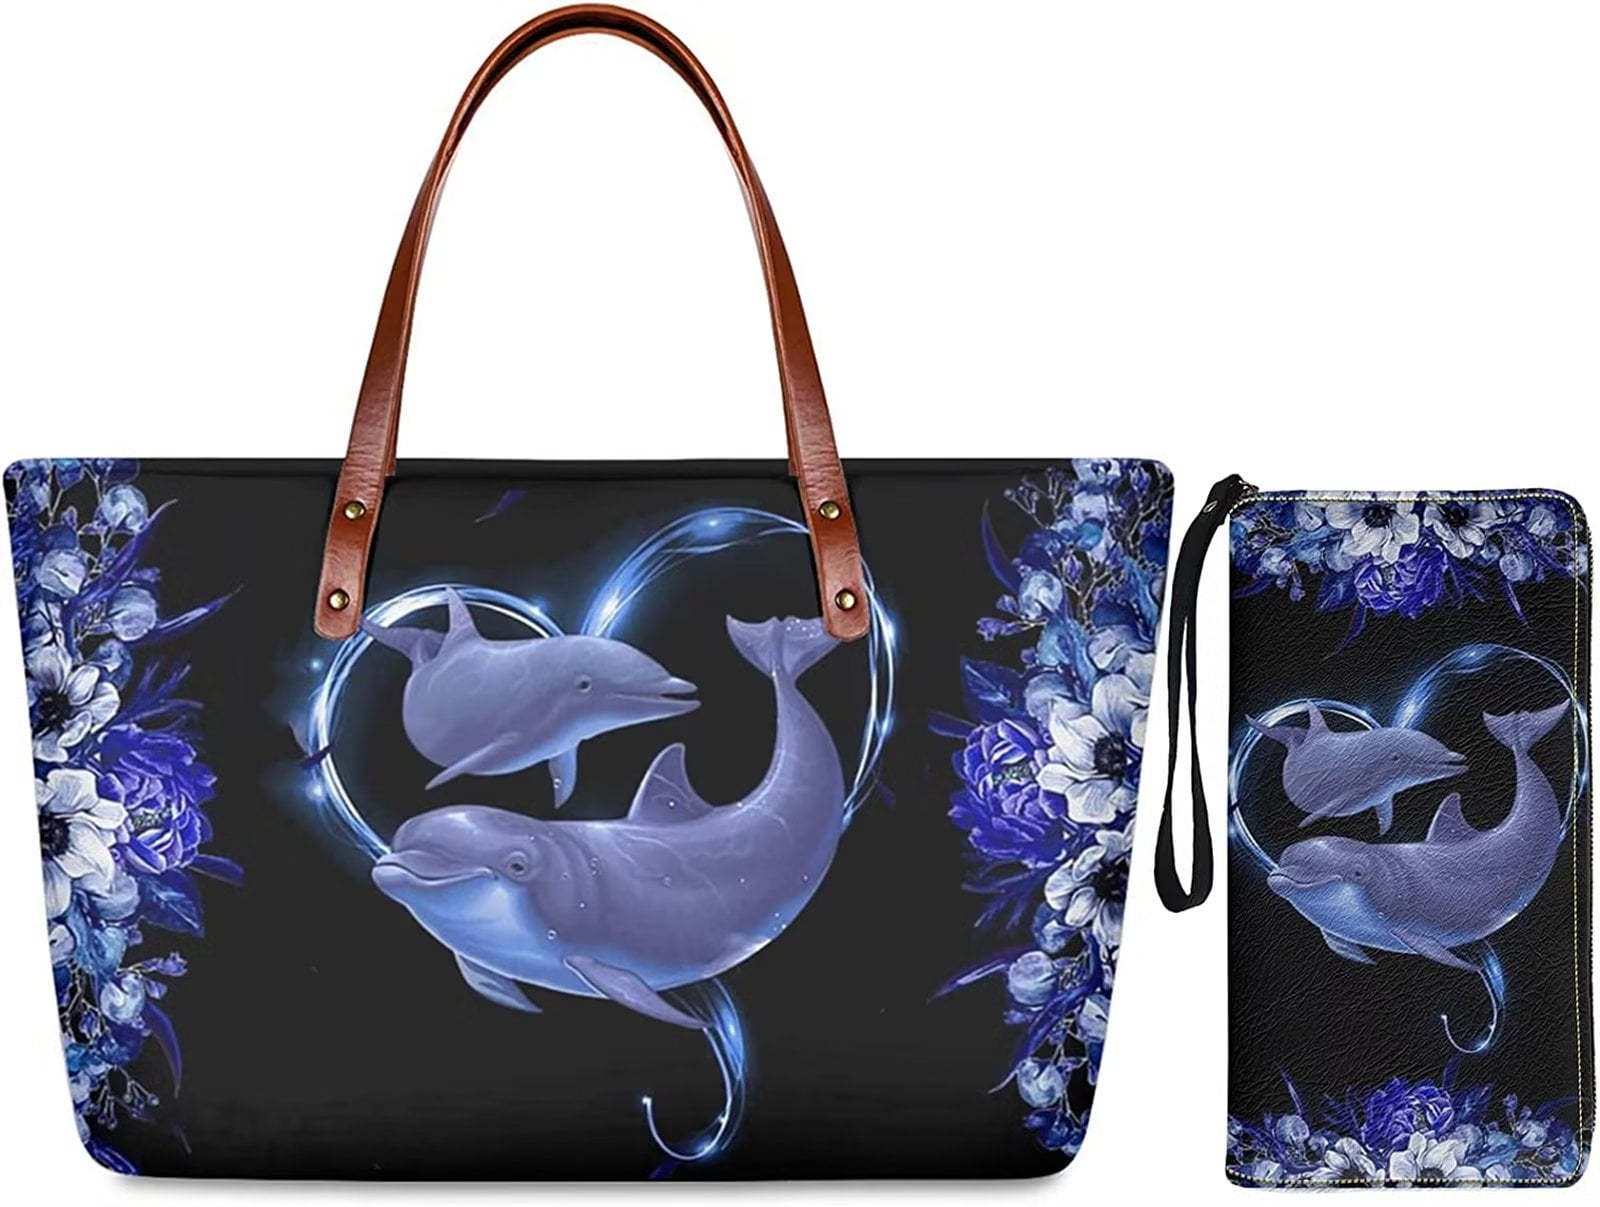 FKELYI 2pcs/set Handbags with Wallet,Dolphin Animal Print Large